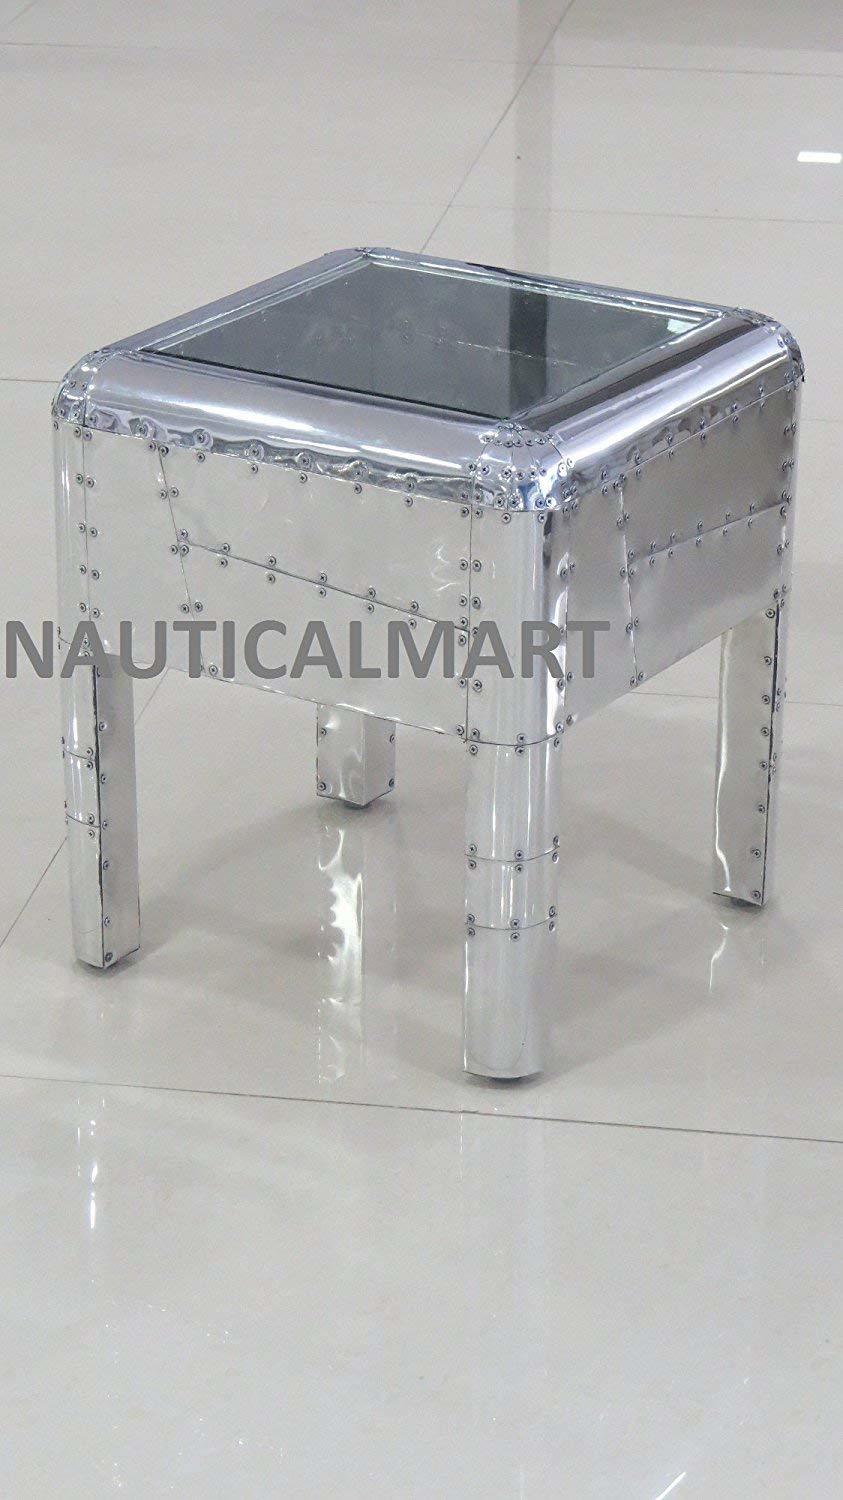 Primary image for NauticalMart Aviator Retro Side Table Silver Finish End Table Bed Room Decor